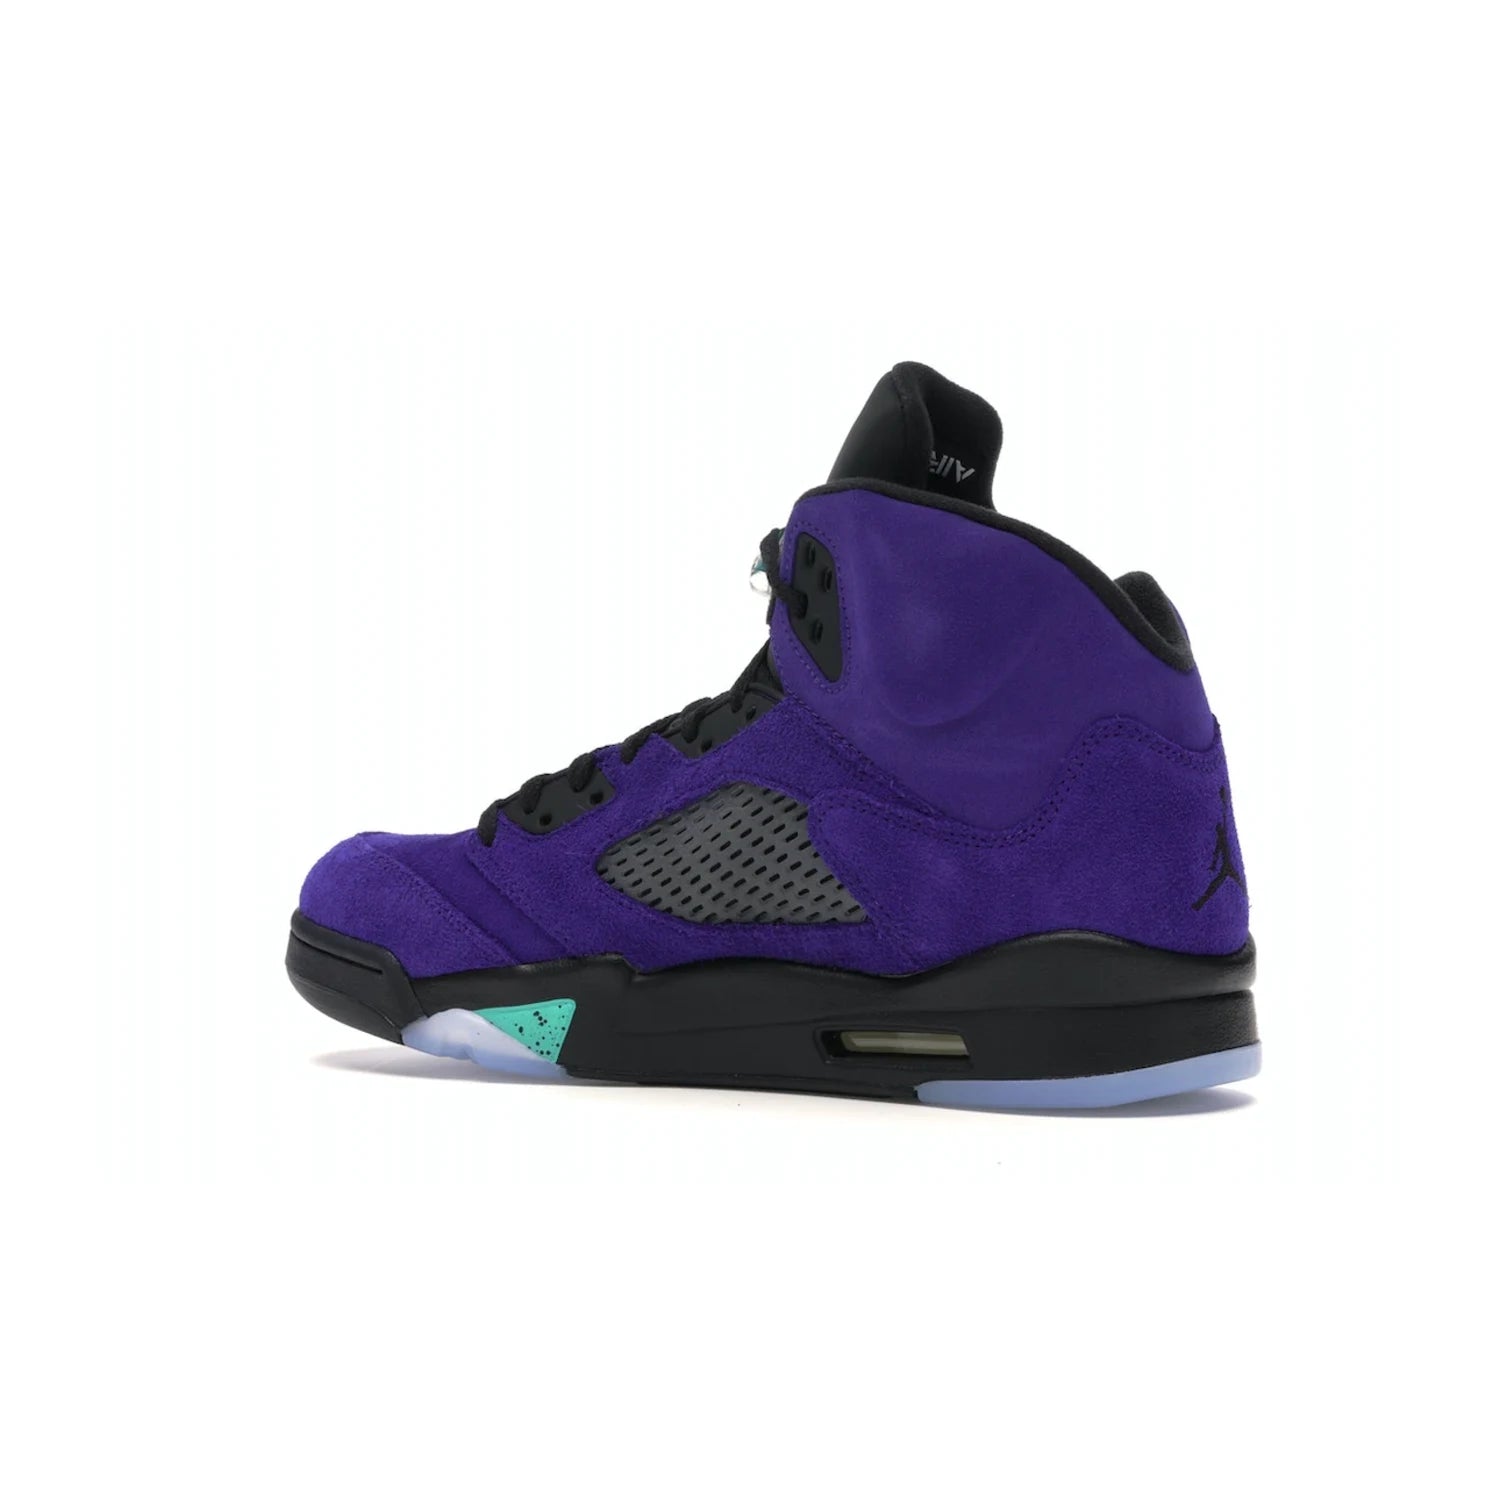 Jordan 5 Retro Alternate Grape - Image 22 - Only at www.BallersClubKickz.com - Bring the classic Jordan 5 Retro Alternate Grape to your sneaker collection! Featuring a purple suede upper, charcoal underlays, green detailing, and an icy and green outsole. Releasing for the first time since 1990, don't miss this chance to add a piece of sneaker history to your collection.